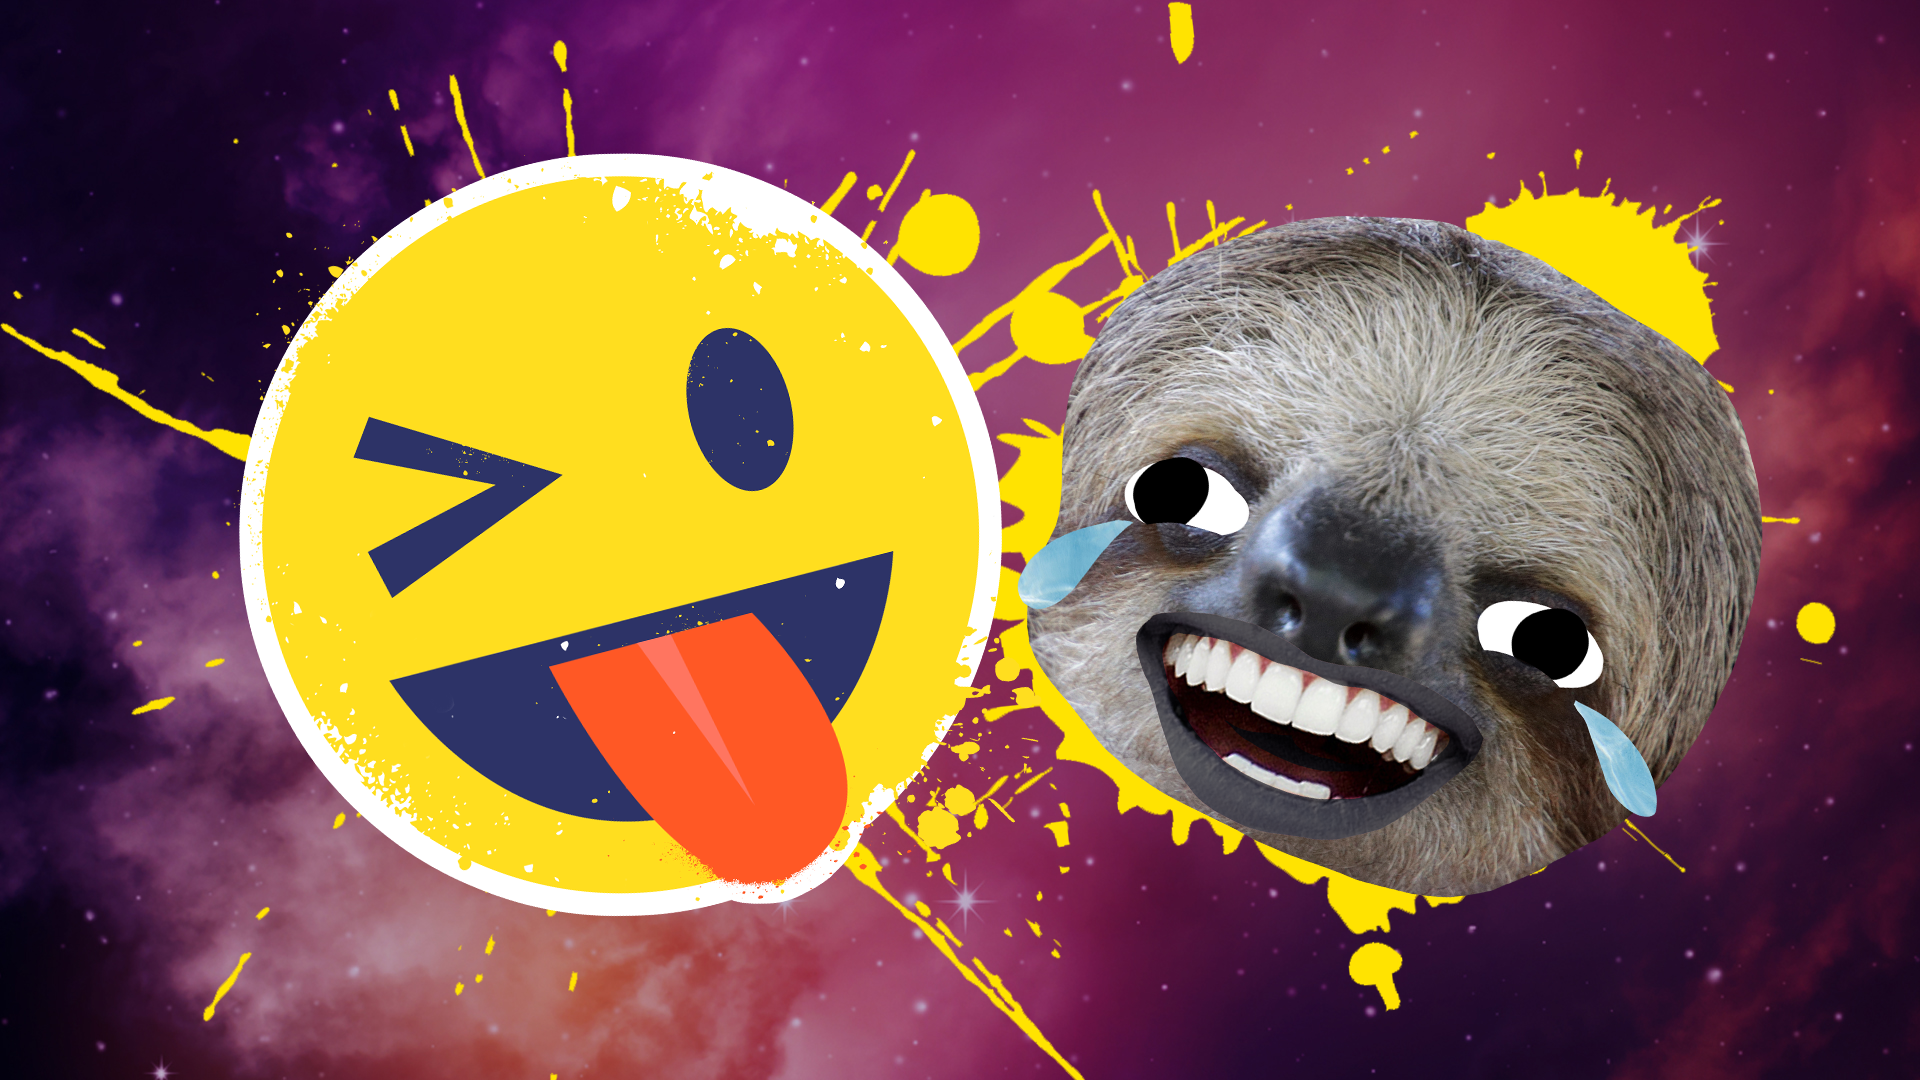 A winking emoji and a laughing sloth